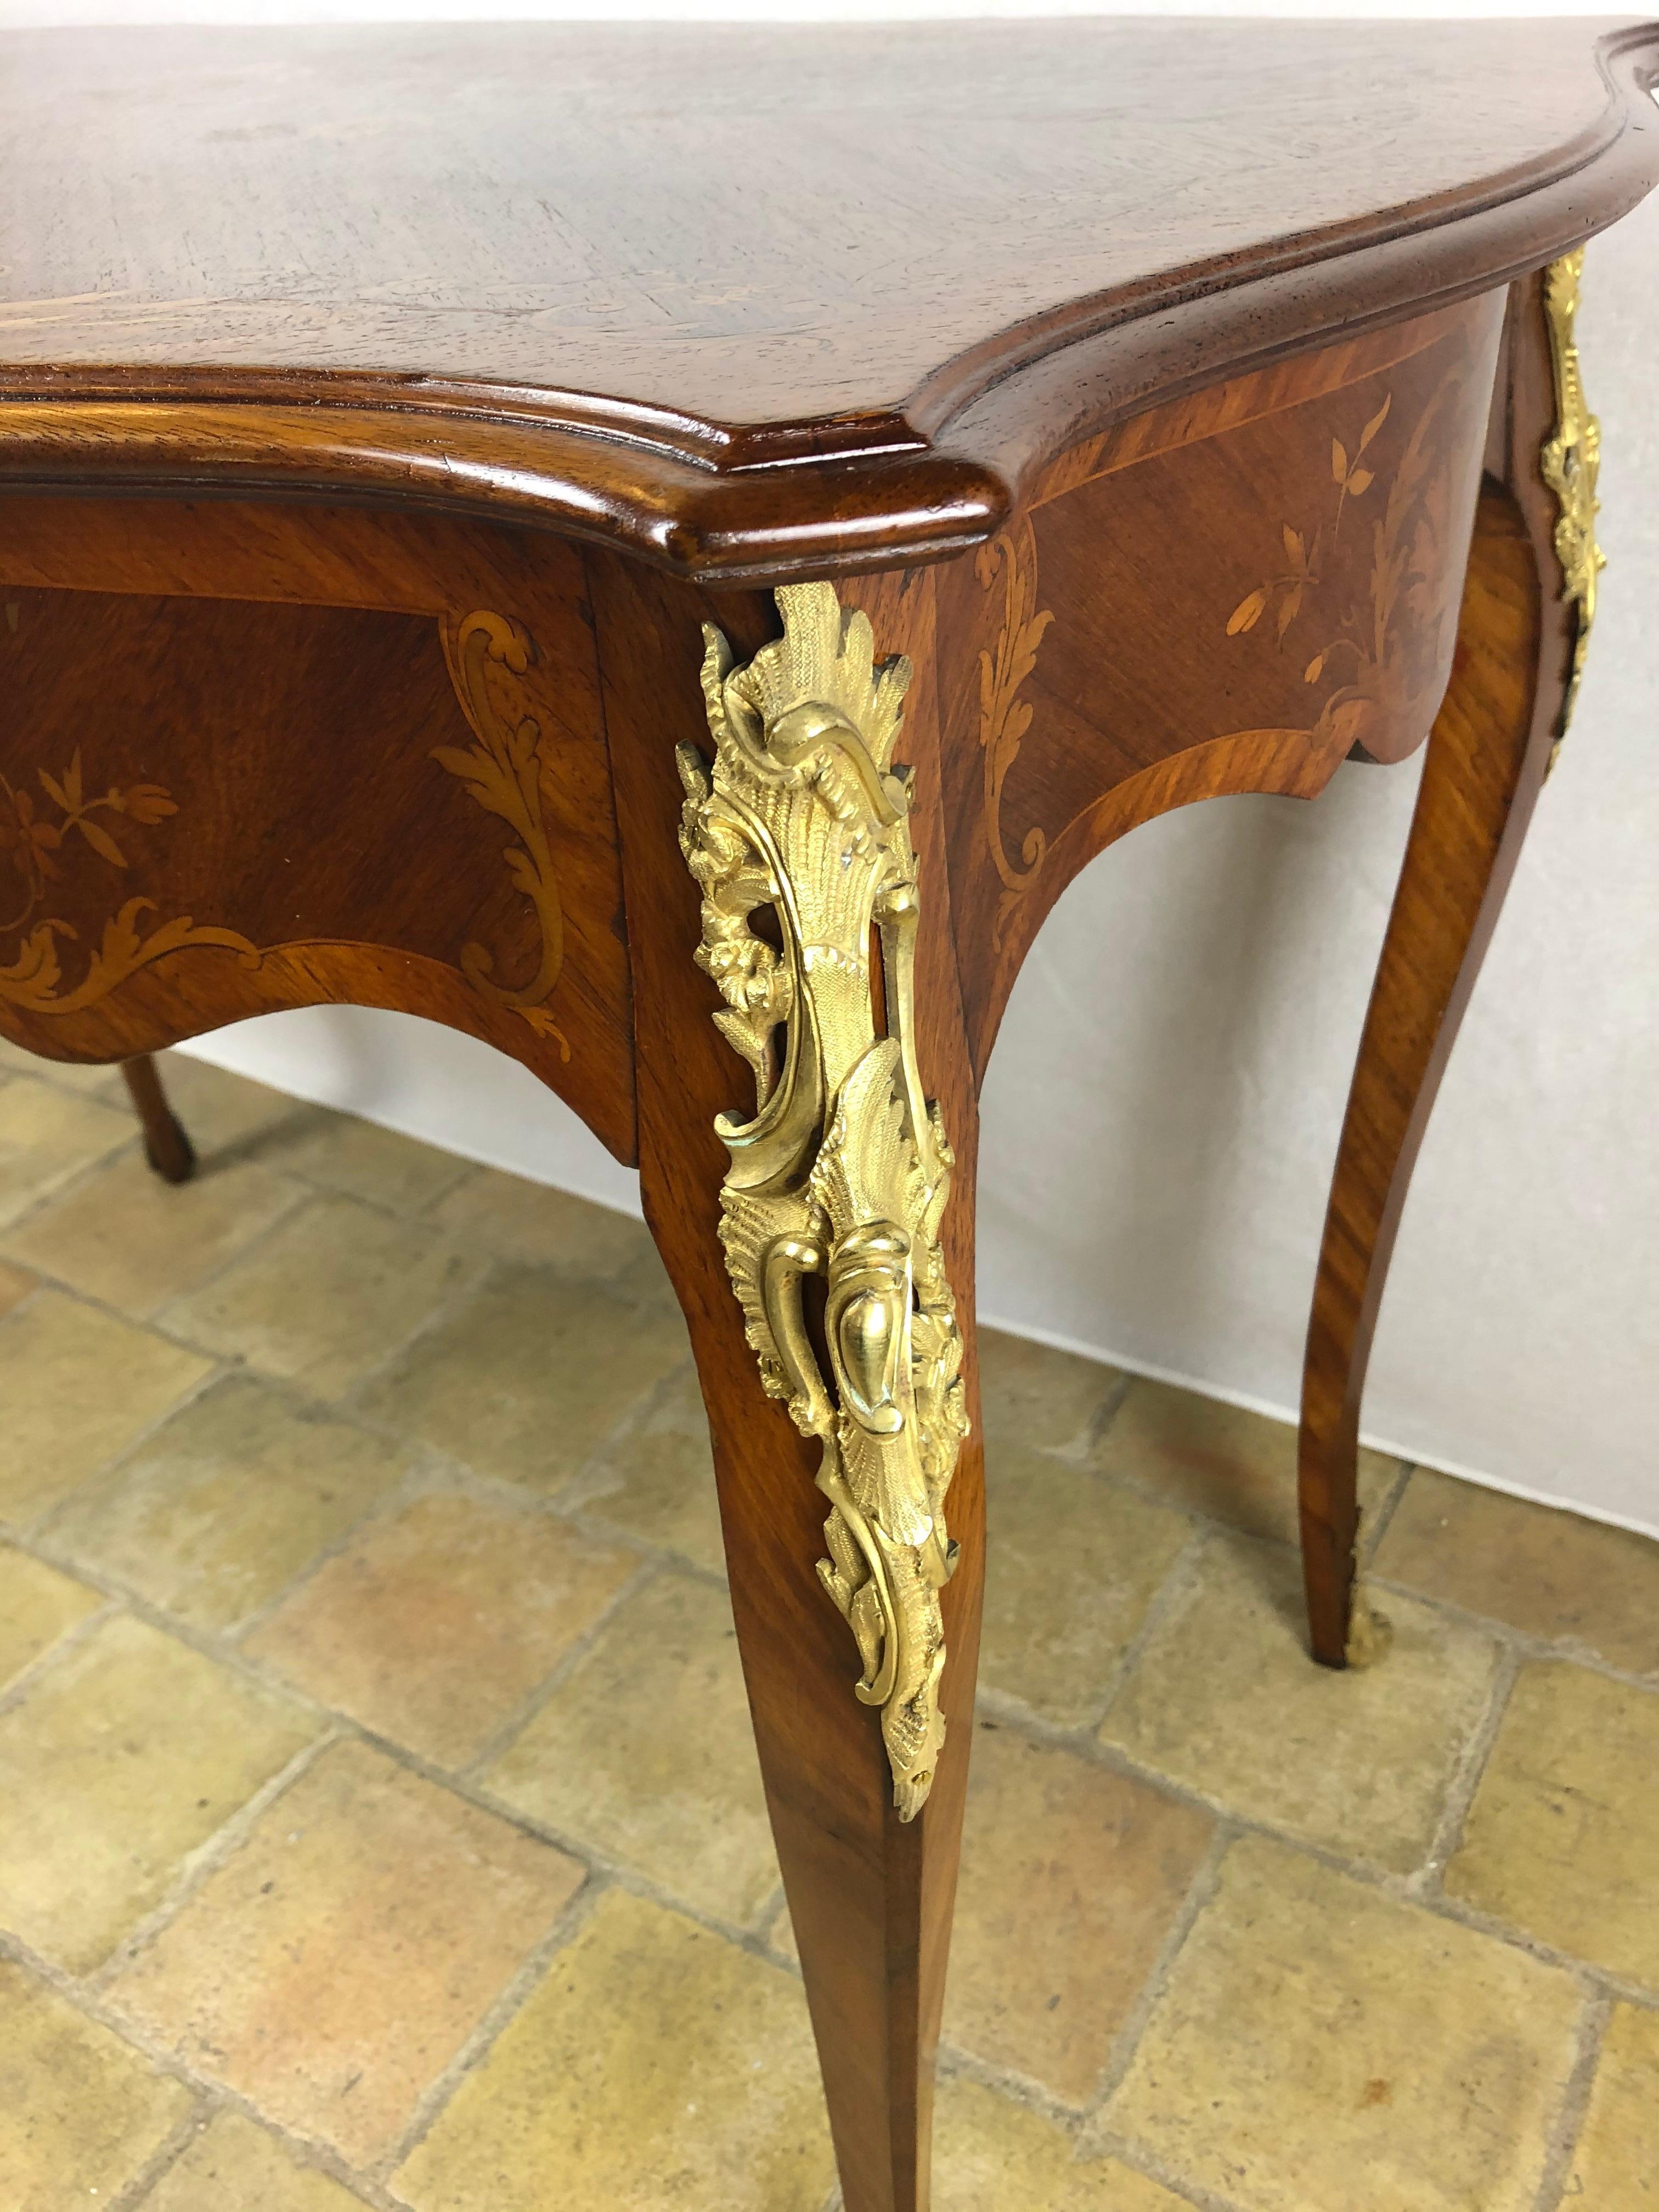 19th Century French Louis XV Style Floral Marquetry and Gilt Bronze Writing Desk For Sale 2